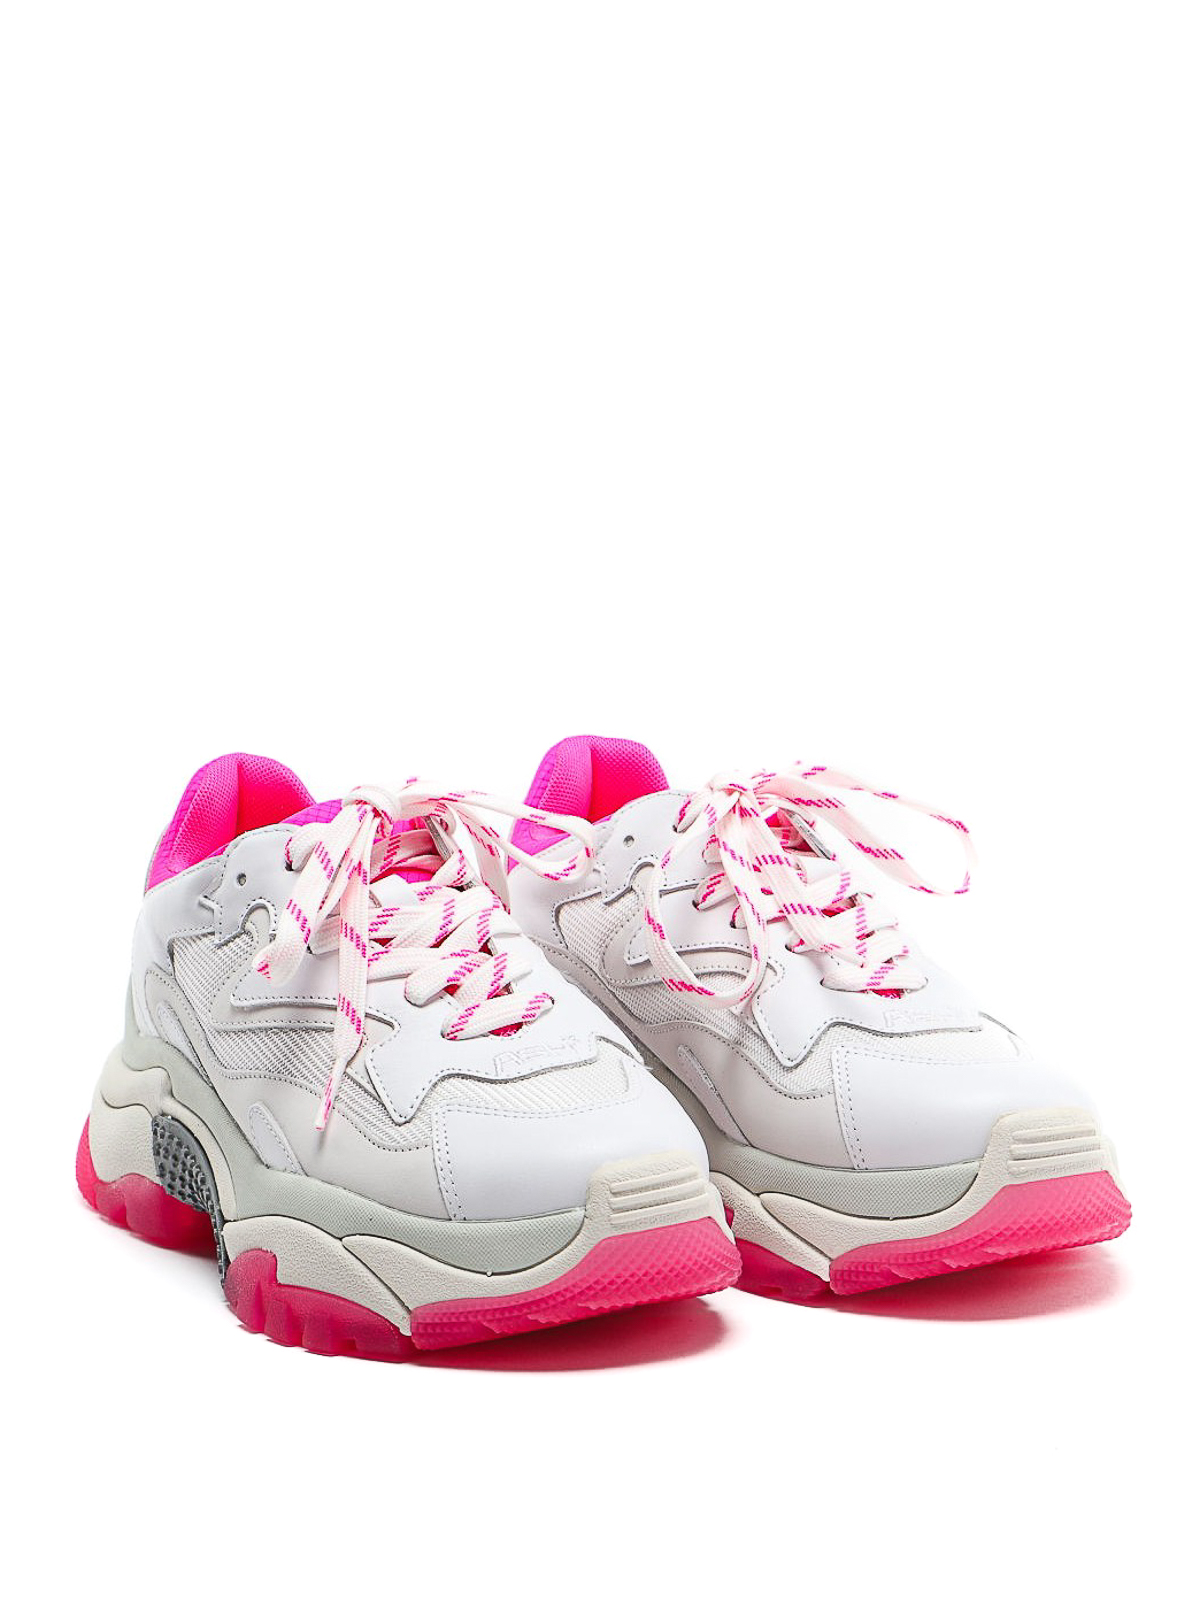 Trainers - Addict pink neon detailed sneakers ADDICT06WHITEMESH